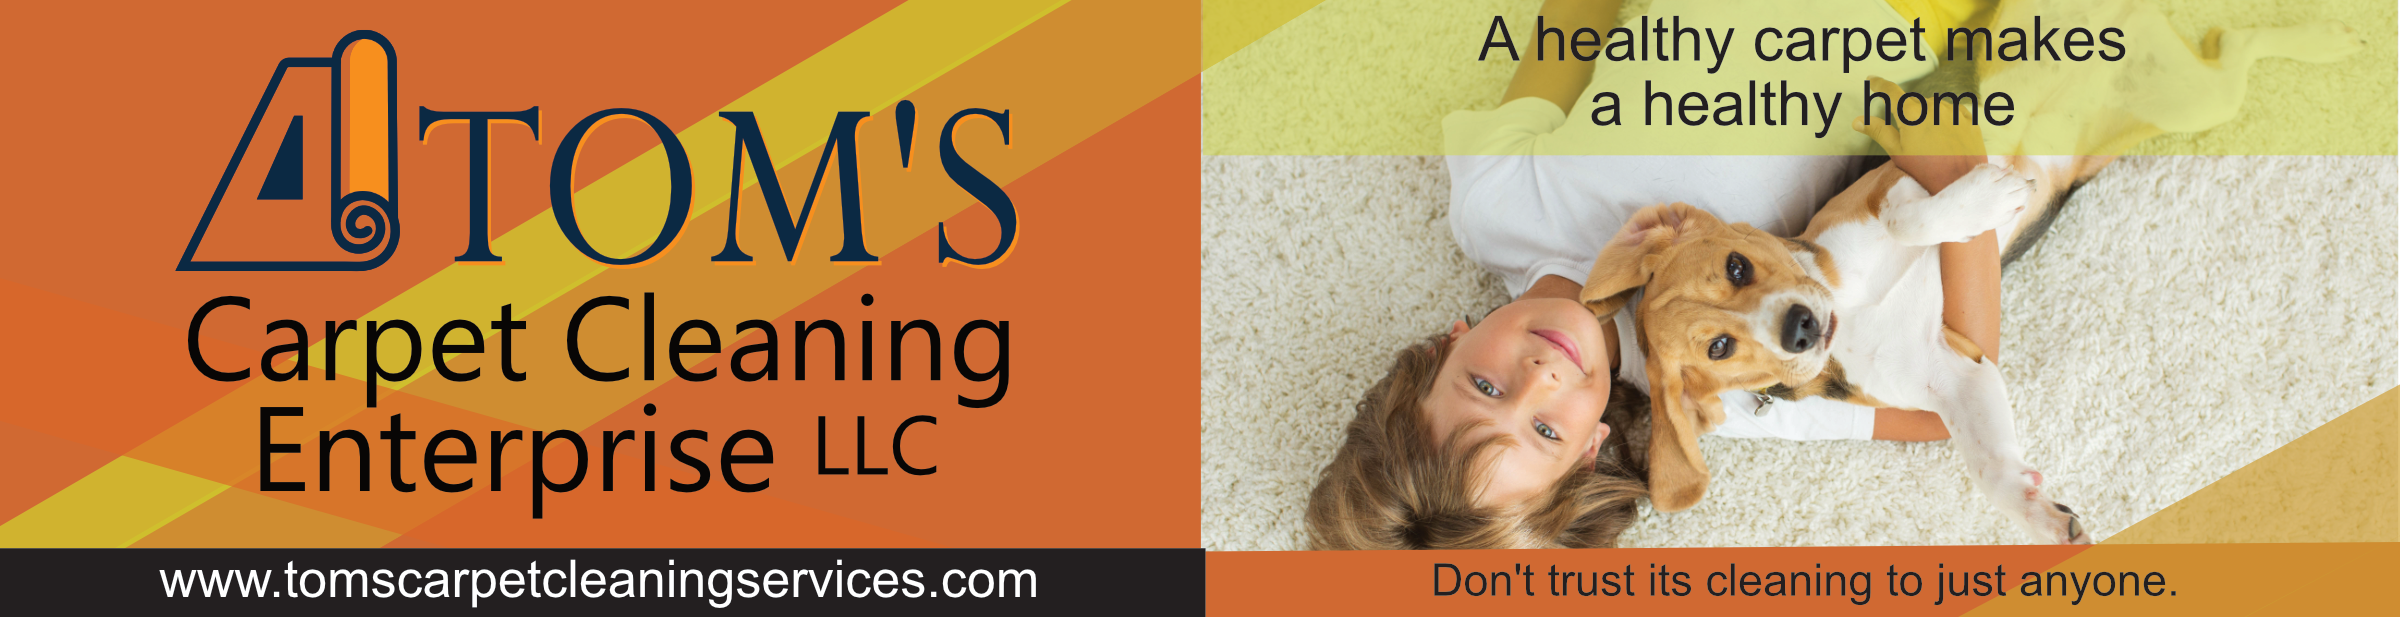 Banner with Toms Carpet Cleaning logo and image of child with their dog on carpet. A healthy carpet makes a healthy home. Dont trust its cleaning to just anyone.